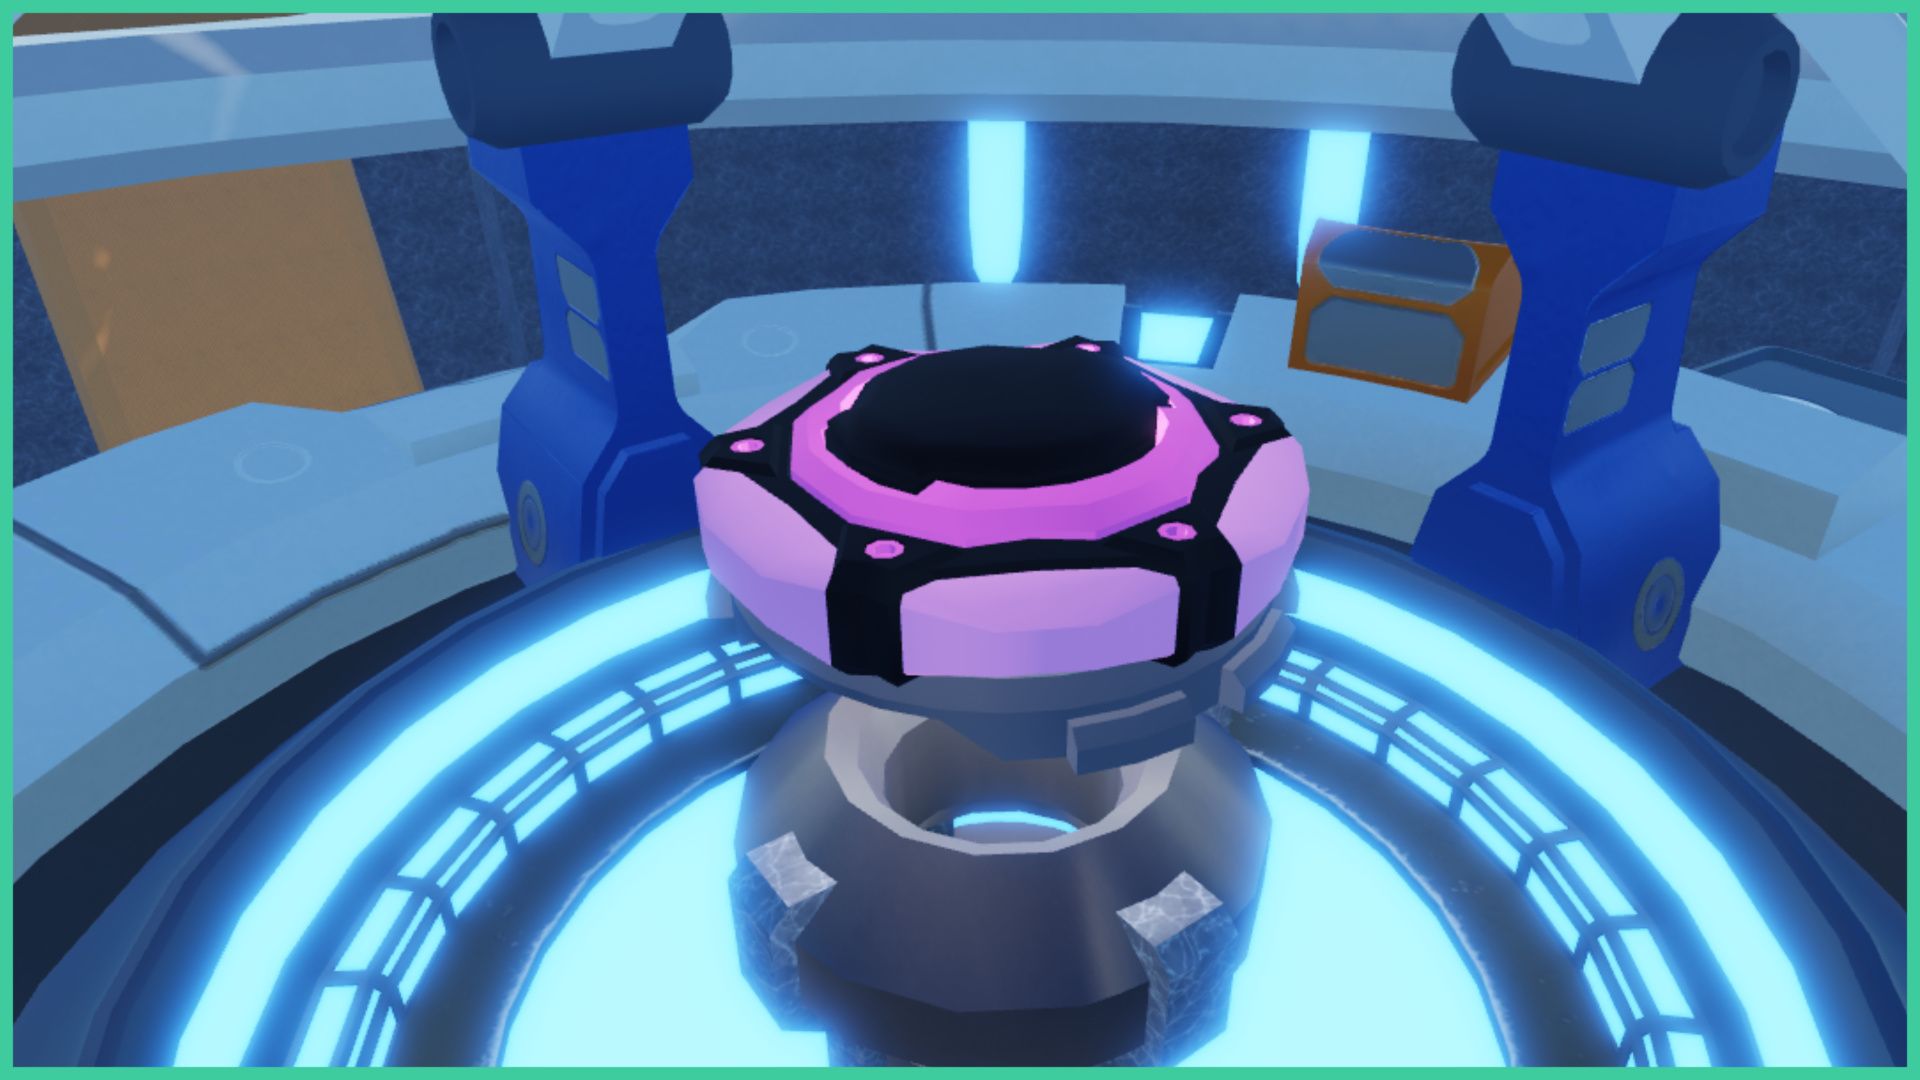 feature image for our bladers rebirth codes guide, it's a screenshot of the blade customisation screen, with a beyblade in the middle being held in place by a robotic mechanism with a glowing base